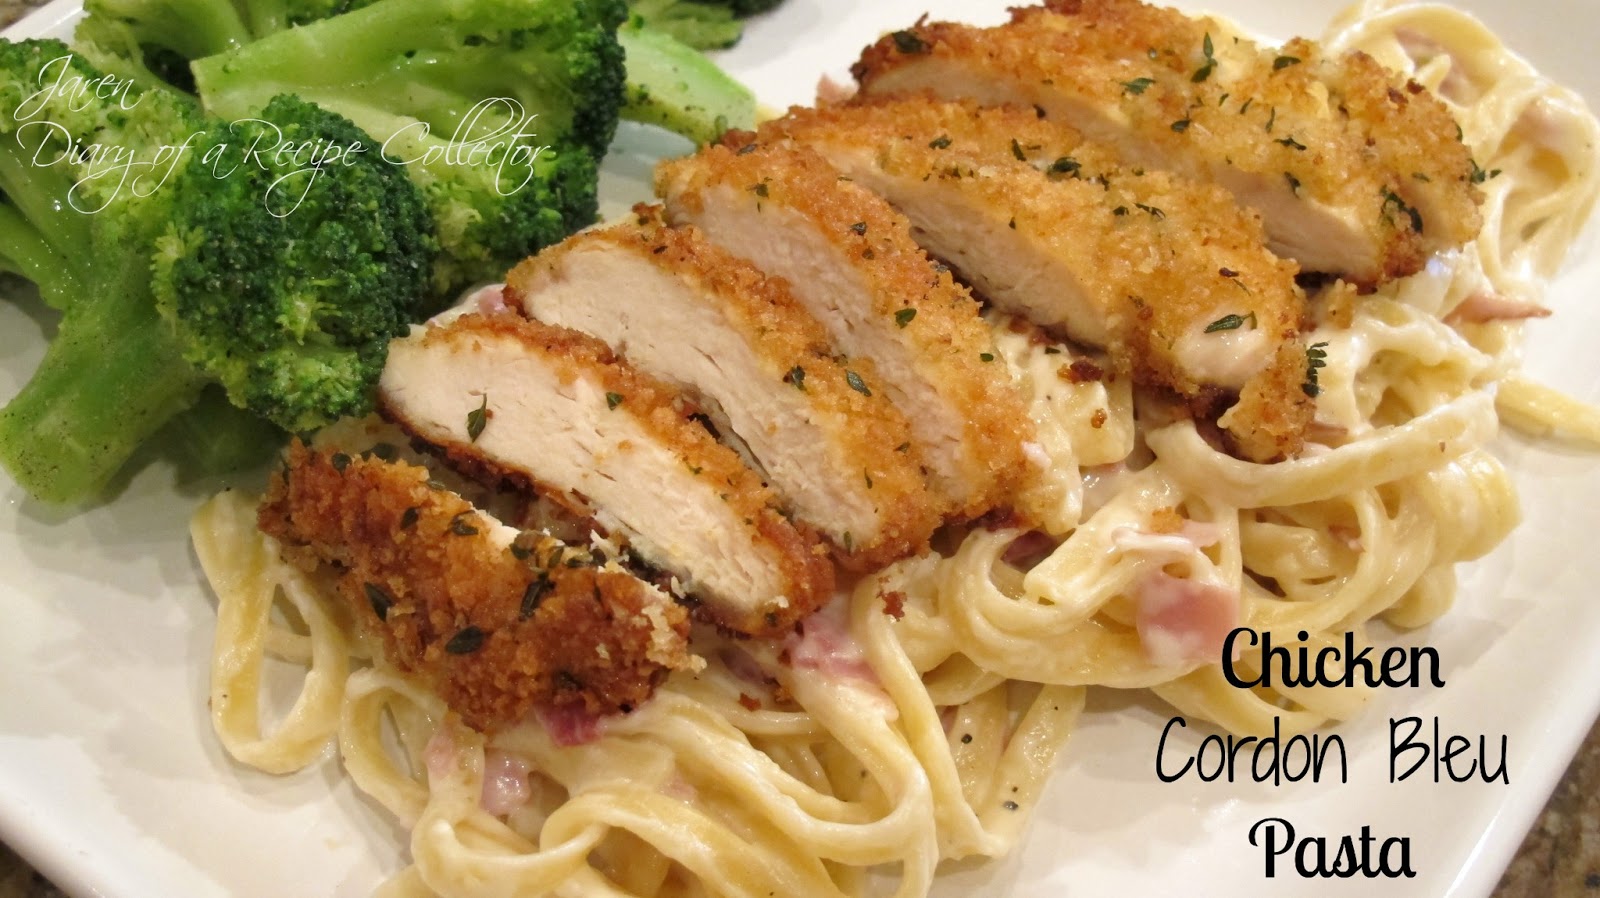 What side dishes are good with Chicken Cordon Bleu?